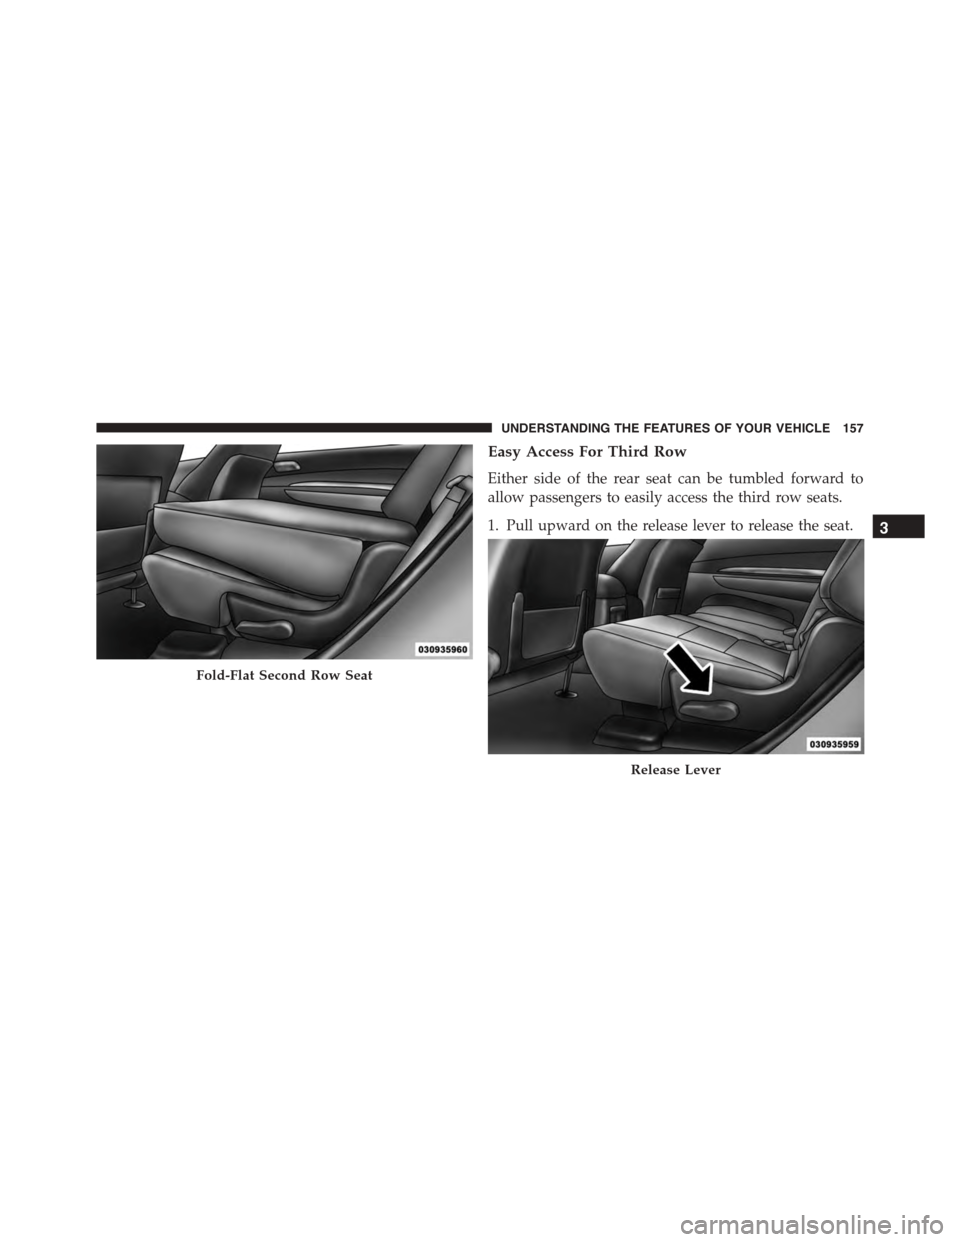 DODGE DURANGO 2015 3.G Owners Manual Easy Access For Third Row
Either side of the rear seat can be tumbled forward to
allow passengers to easily access the third row seats.
1. Pull upward on the release lever to release the seat.
Fold-Fl